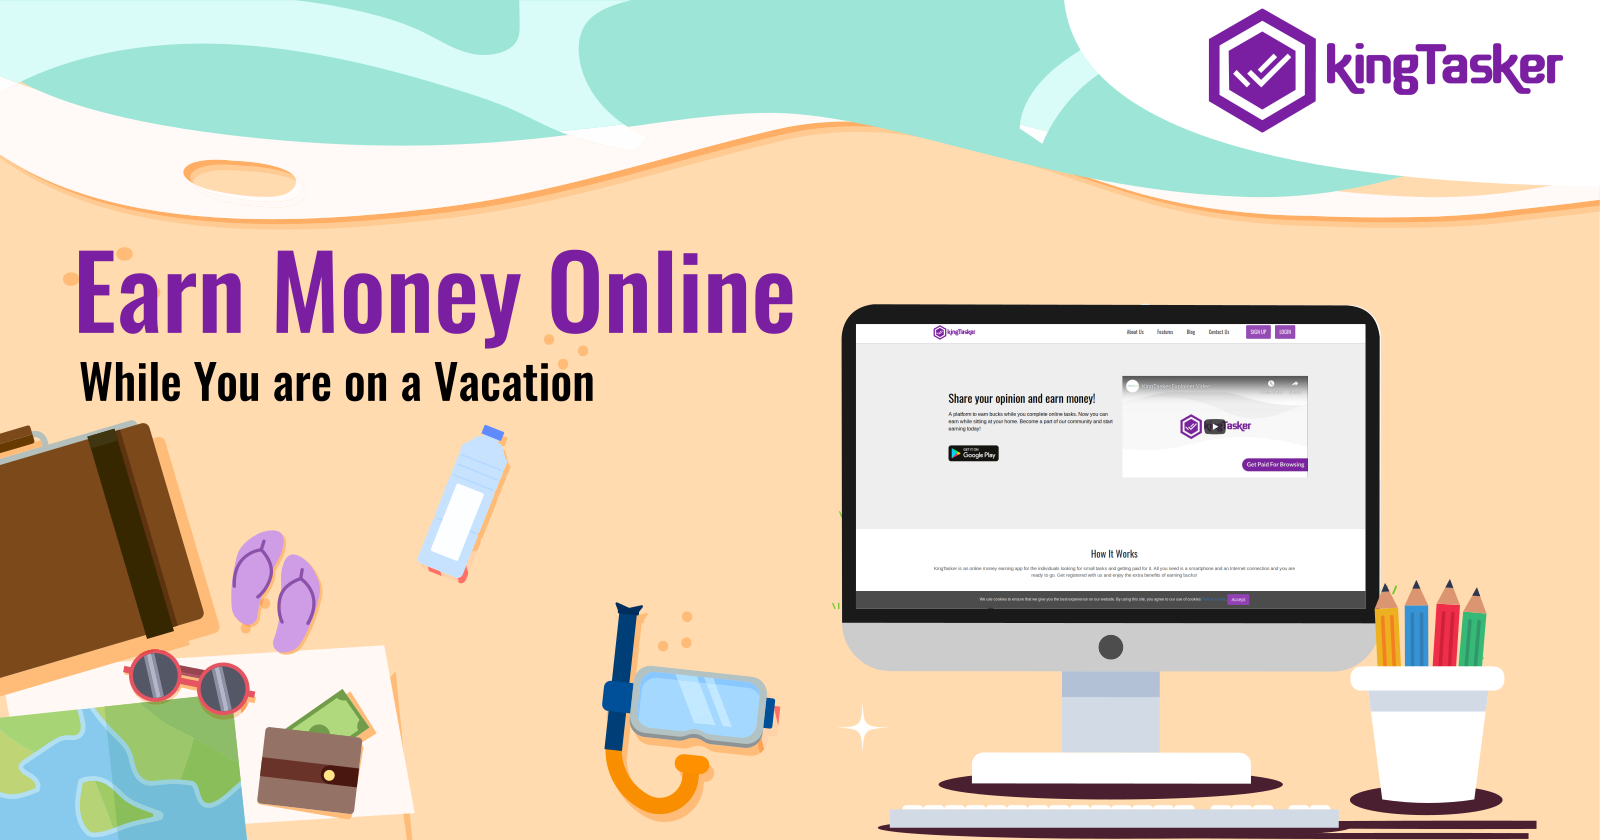 Earn Money Online While You are on a Vacation